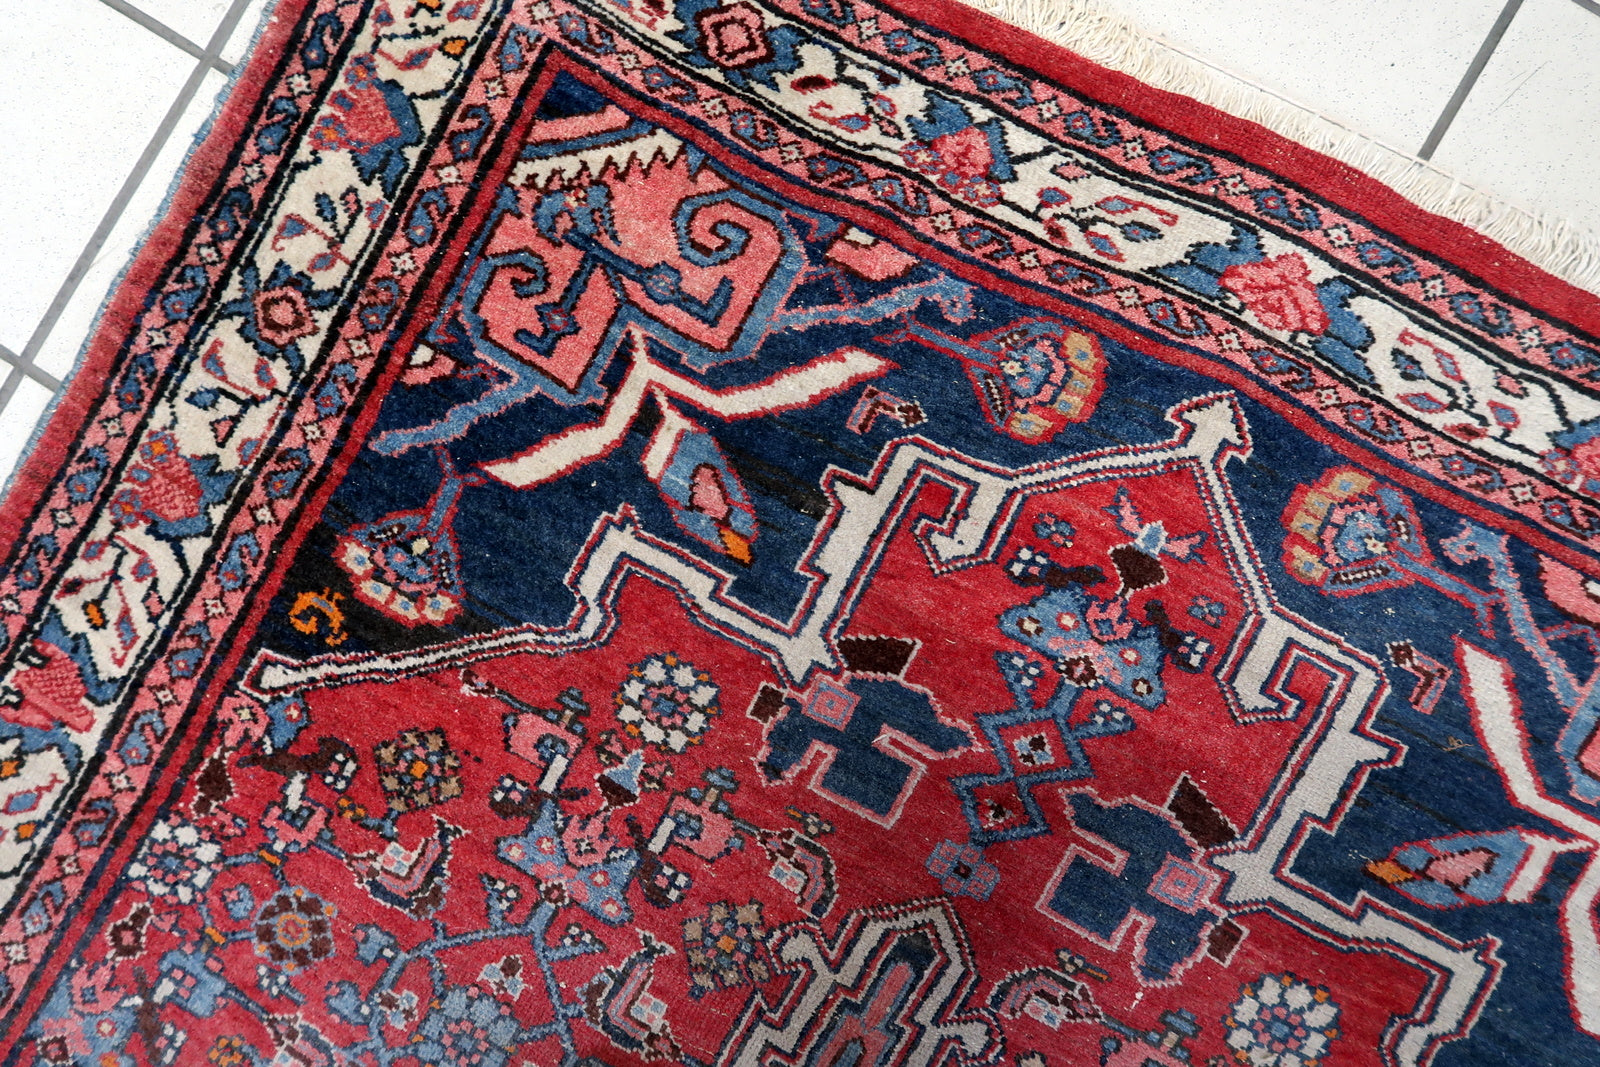 Close-up of deep red hues on Handmade Vintage Persian Bidjar Rug - Detailed view highlighting the rich deep red color dominating the rug.